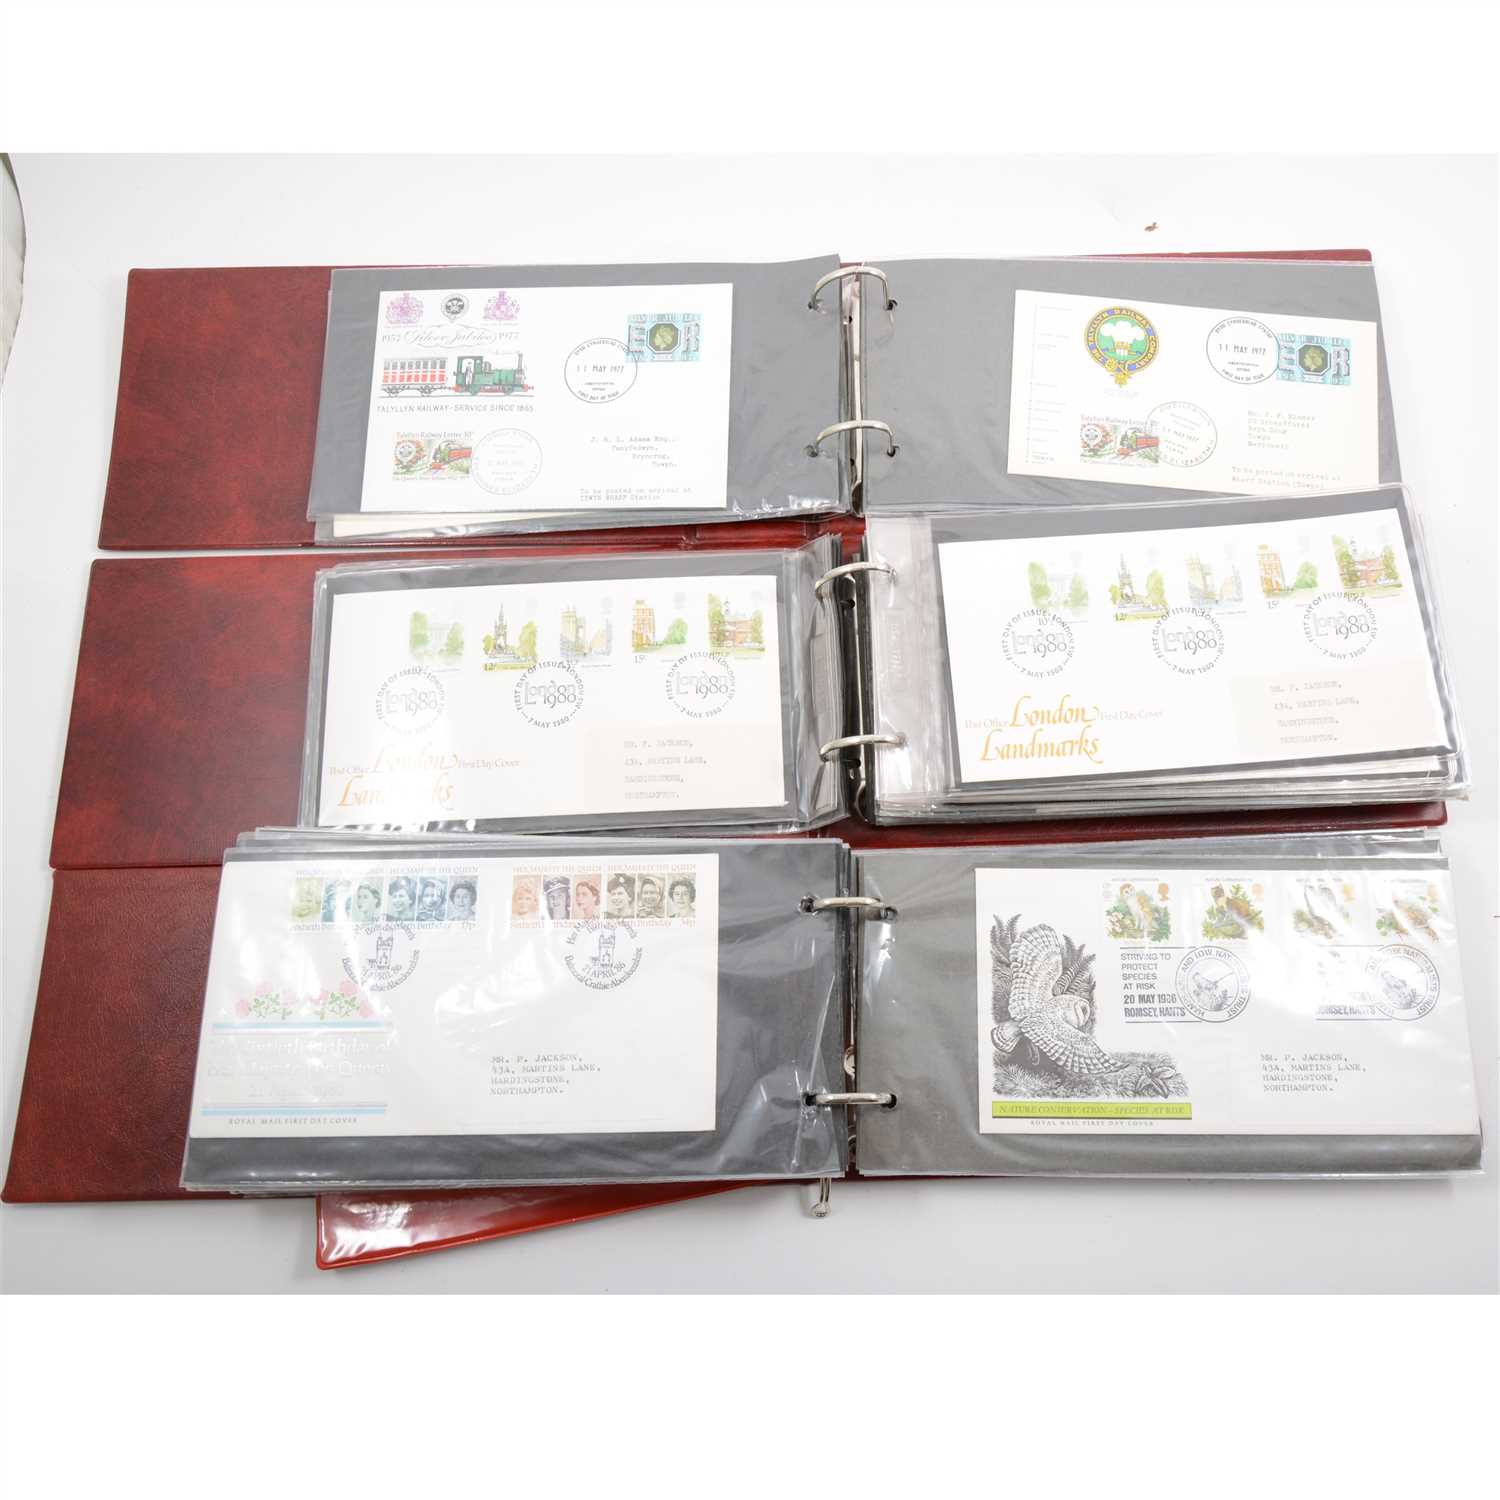 Lot 100 - A collection of First day Covers from the period 1979-1987, and two hundred and twelve Benham silks